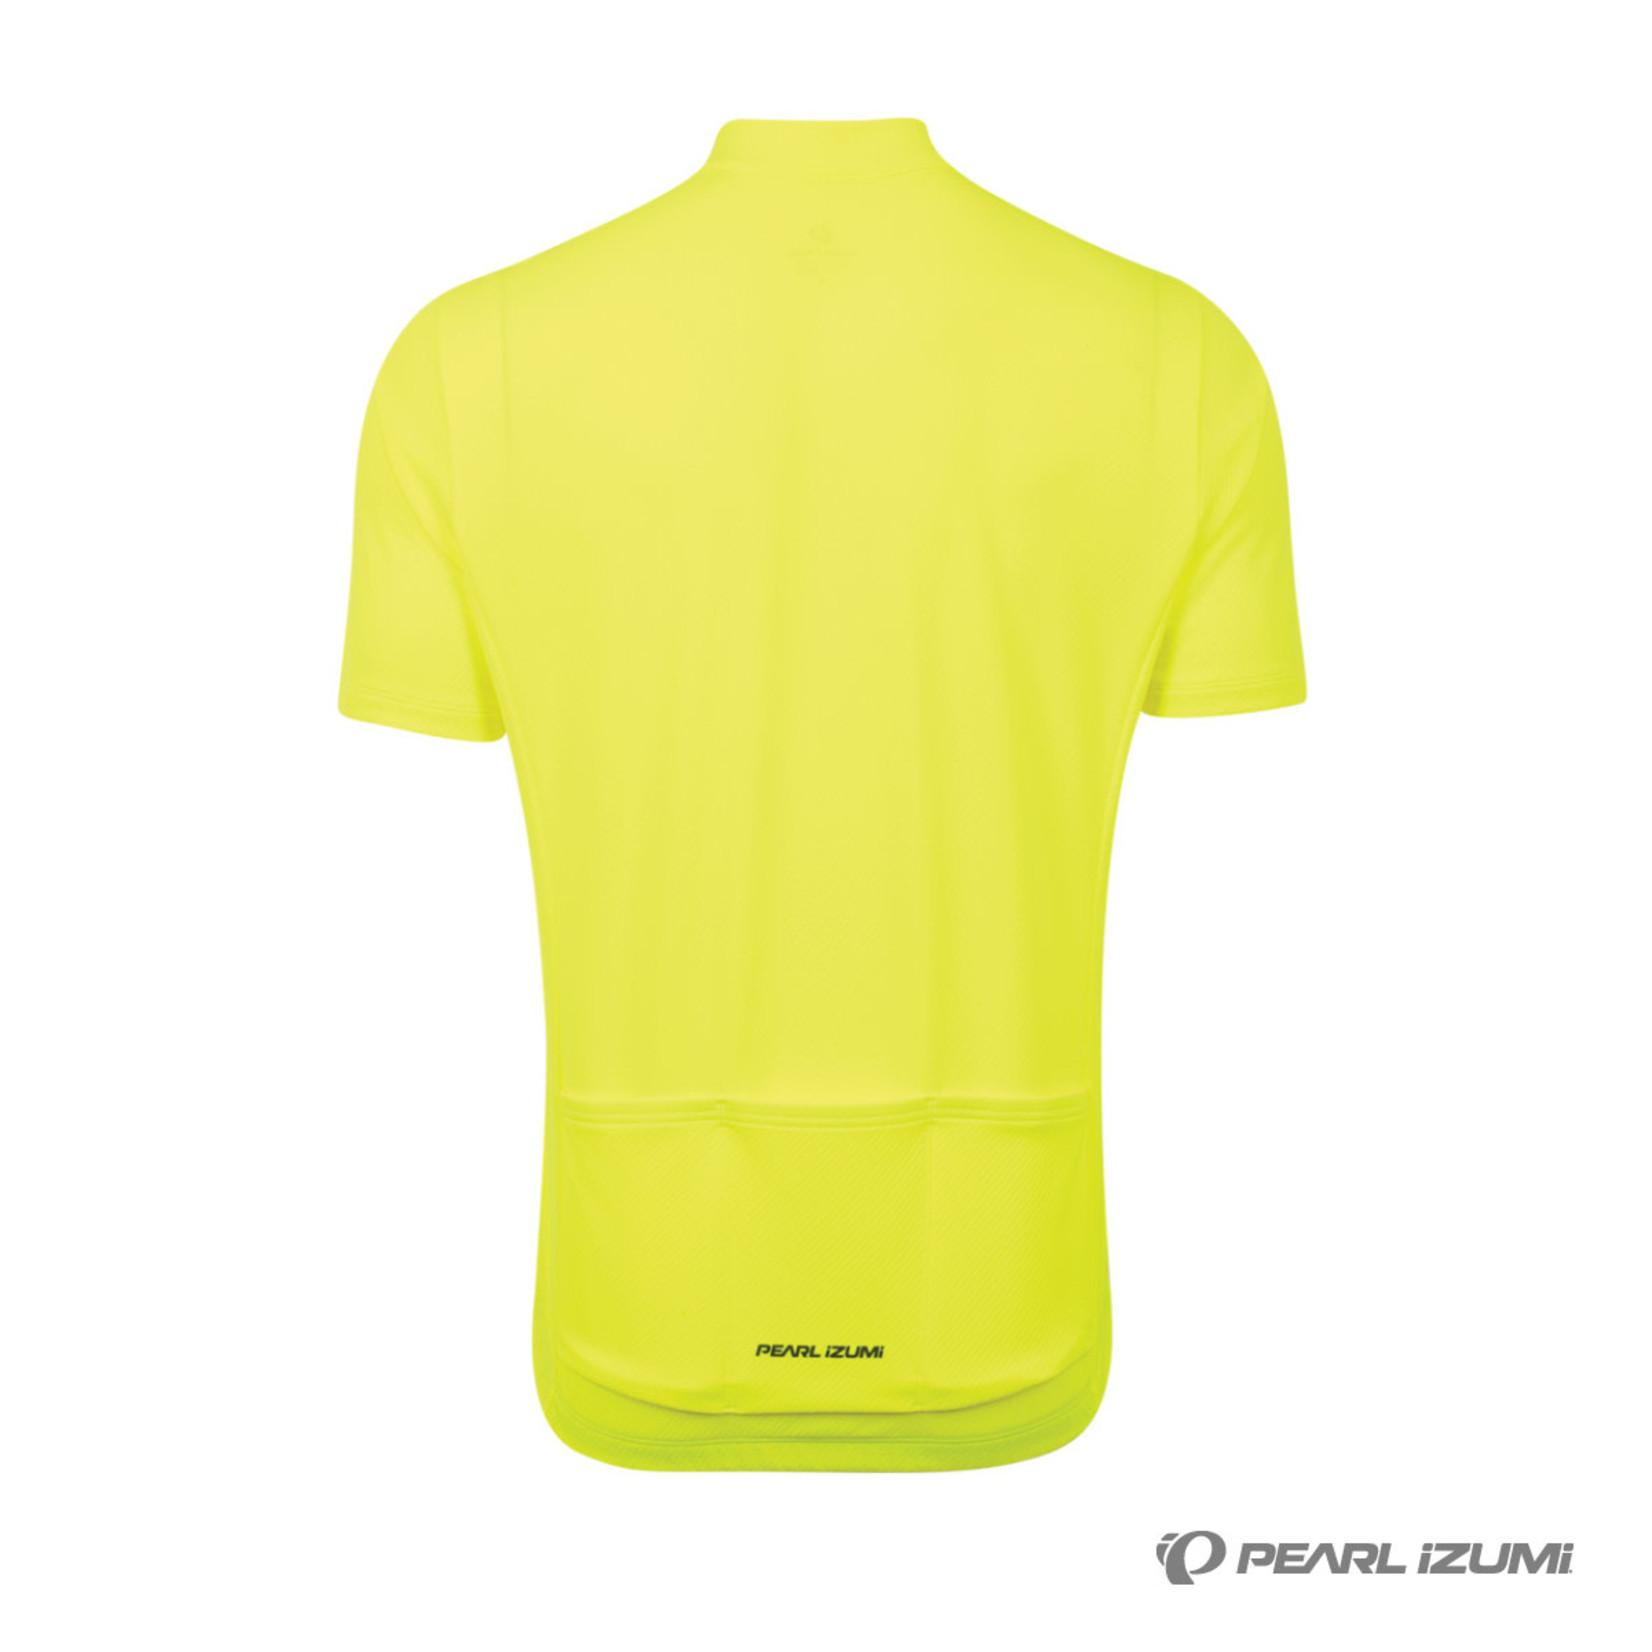 Pearl Izumi Pearl Izumi Quest Short Sleeve Jersey - Screaming Yellow -50% Recycled Material